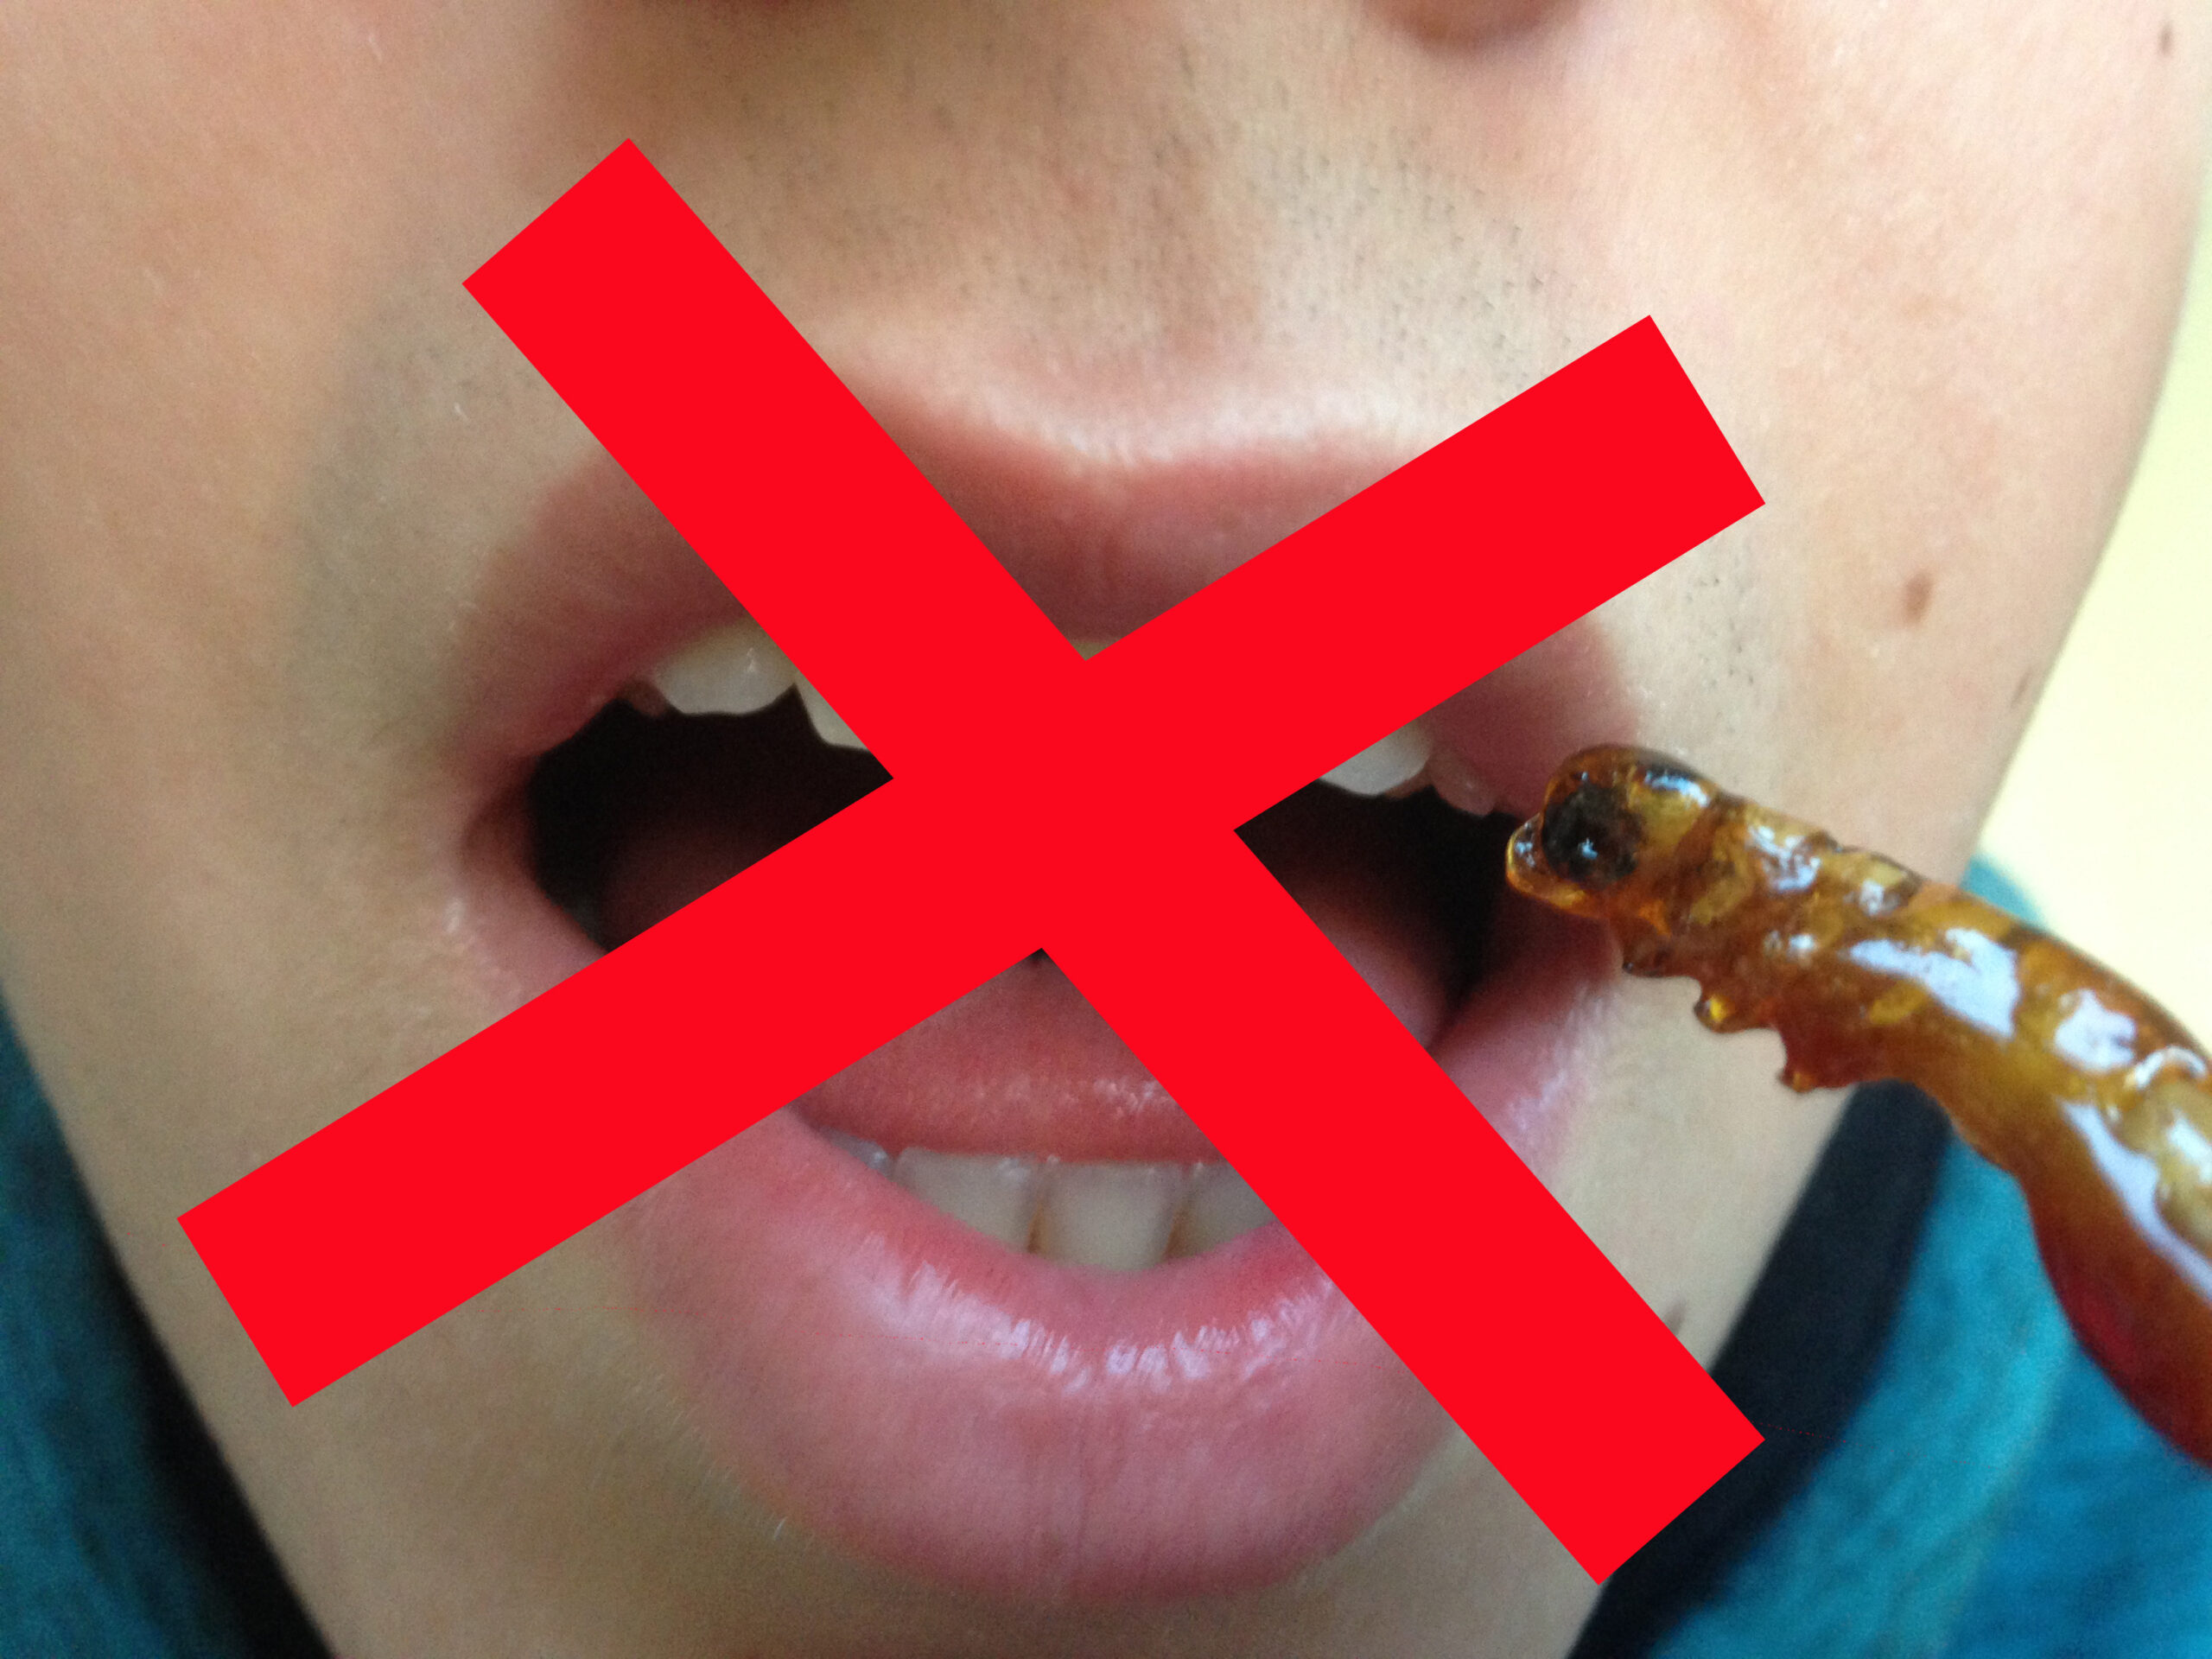 Illegal UK edible insects